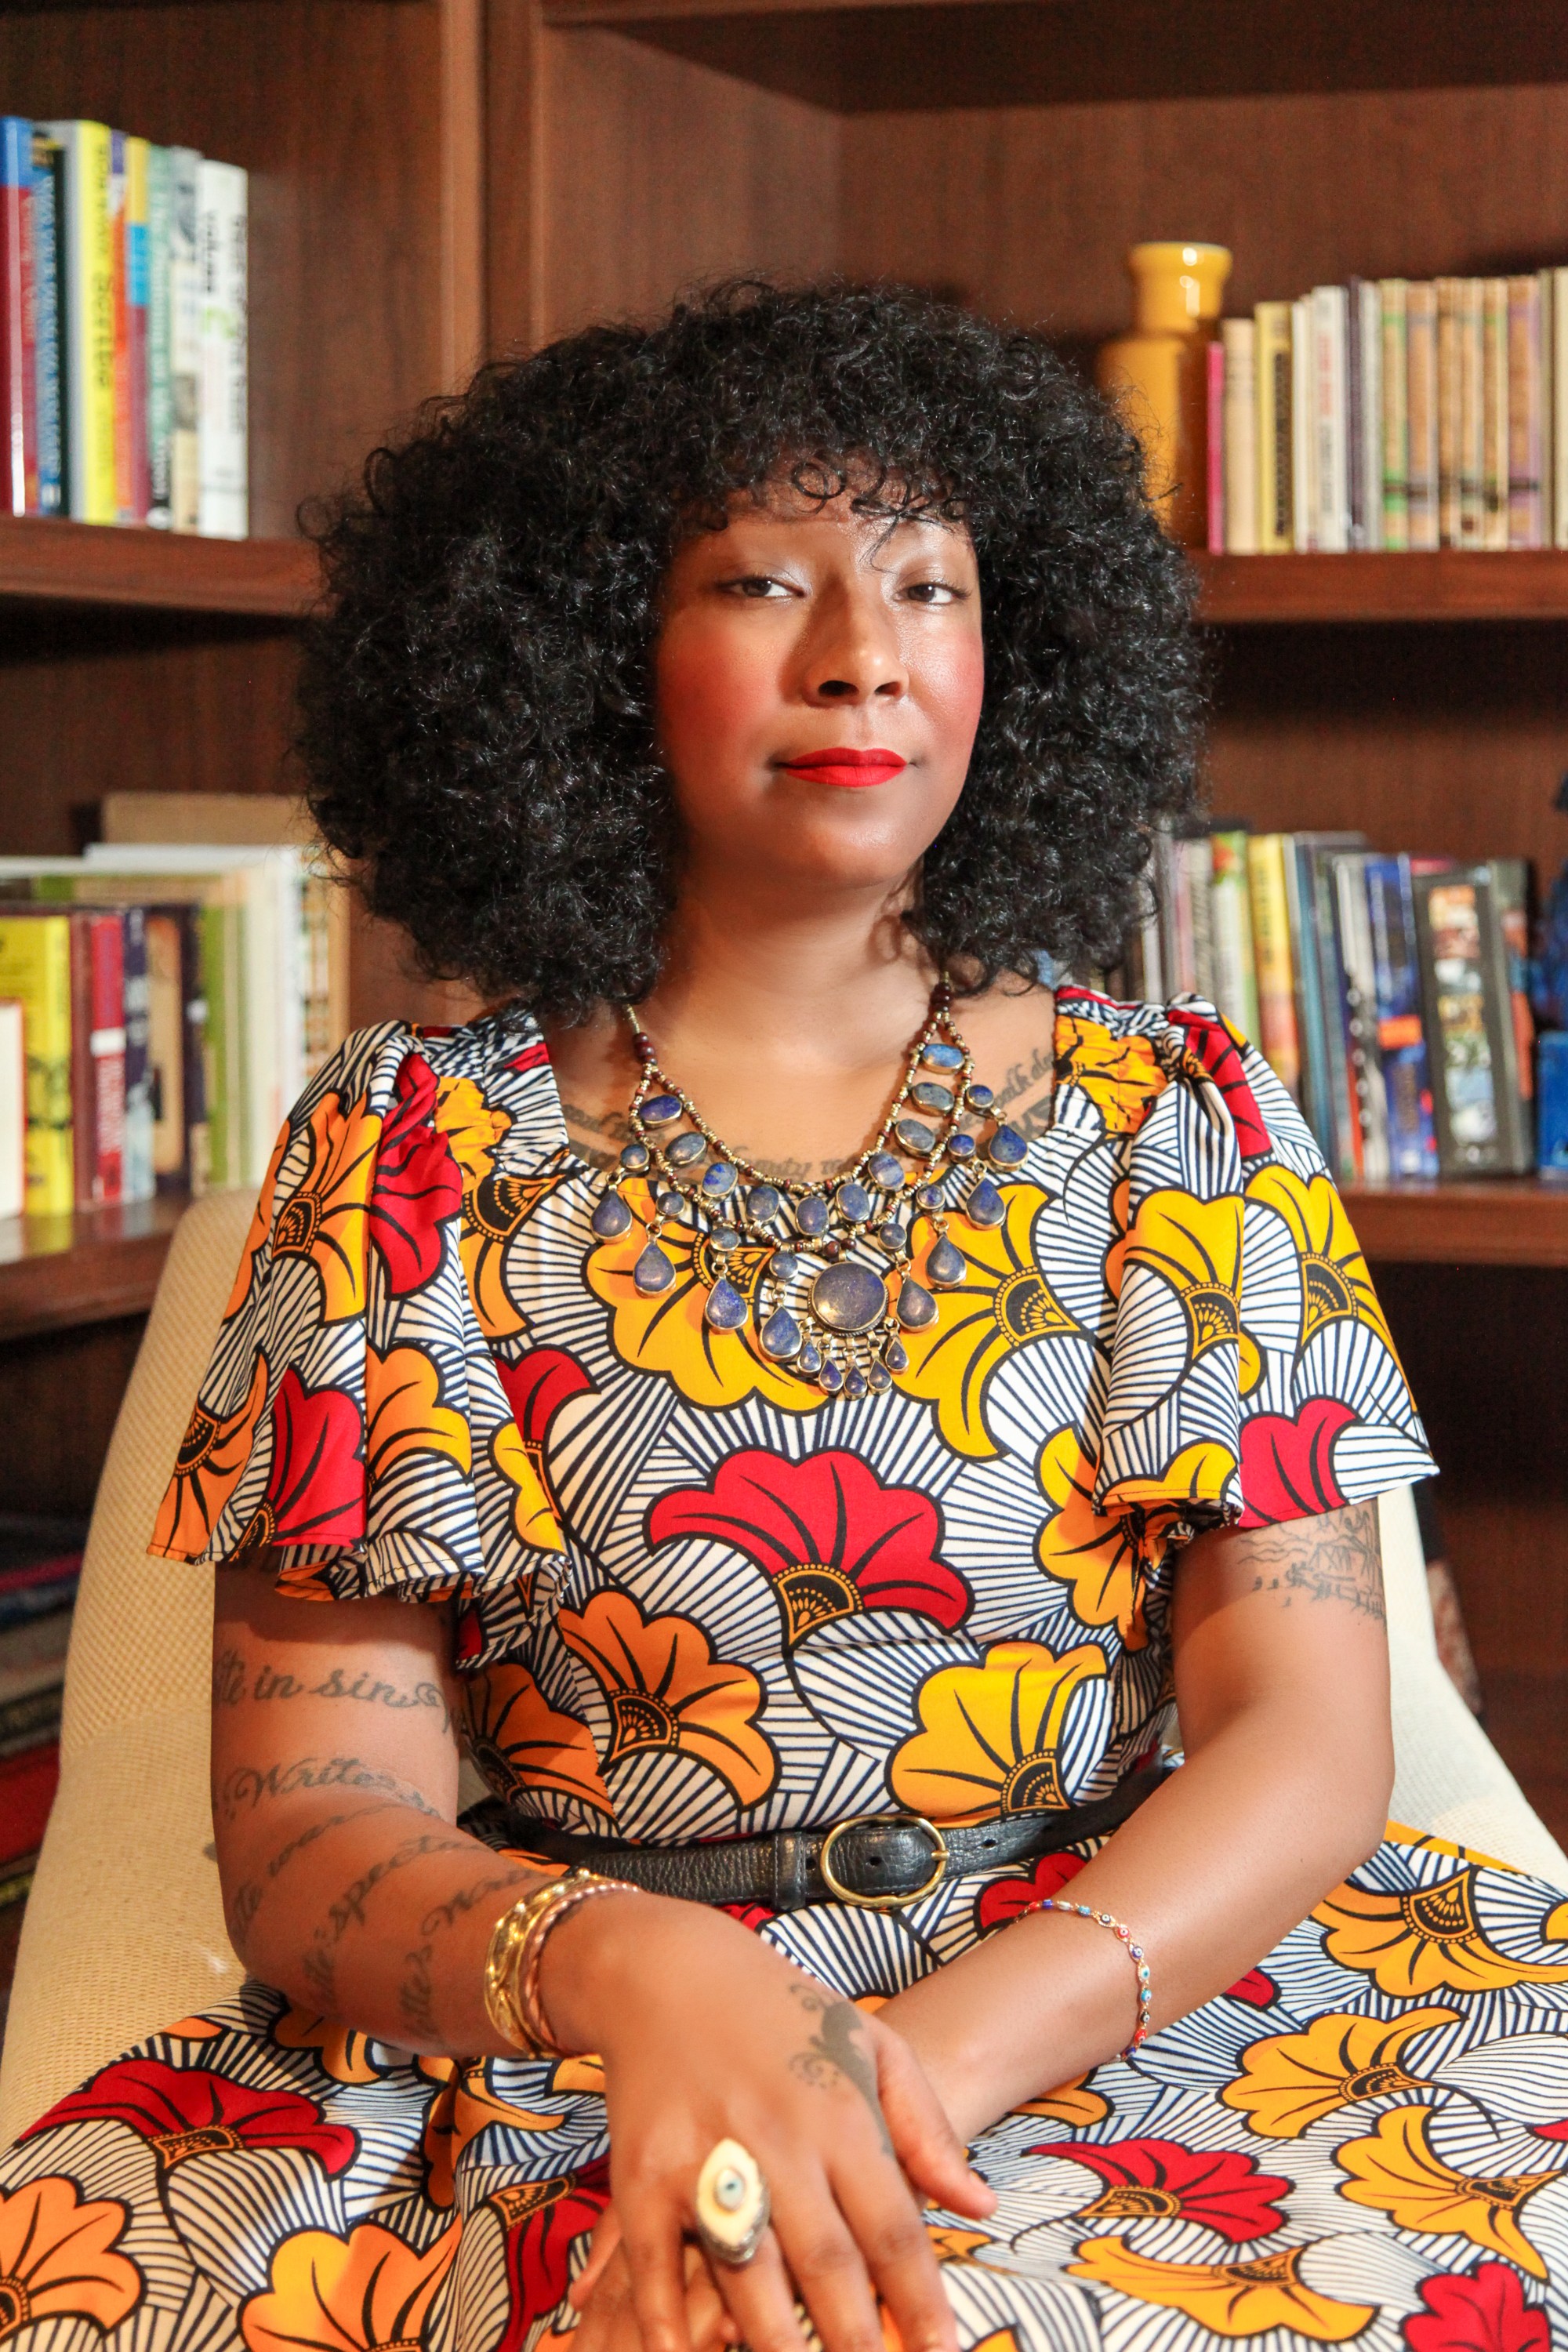 S. Erin is a Black woman with lush curly black hair and red lipstick, seated and framed by shelves of books. She is wearing an Ankara waxcloth navy blue & white striped dress with ruffles and bright red and orange printed fans, along with gold, silver, and lapis lazuli vintage jewelry.